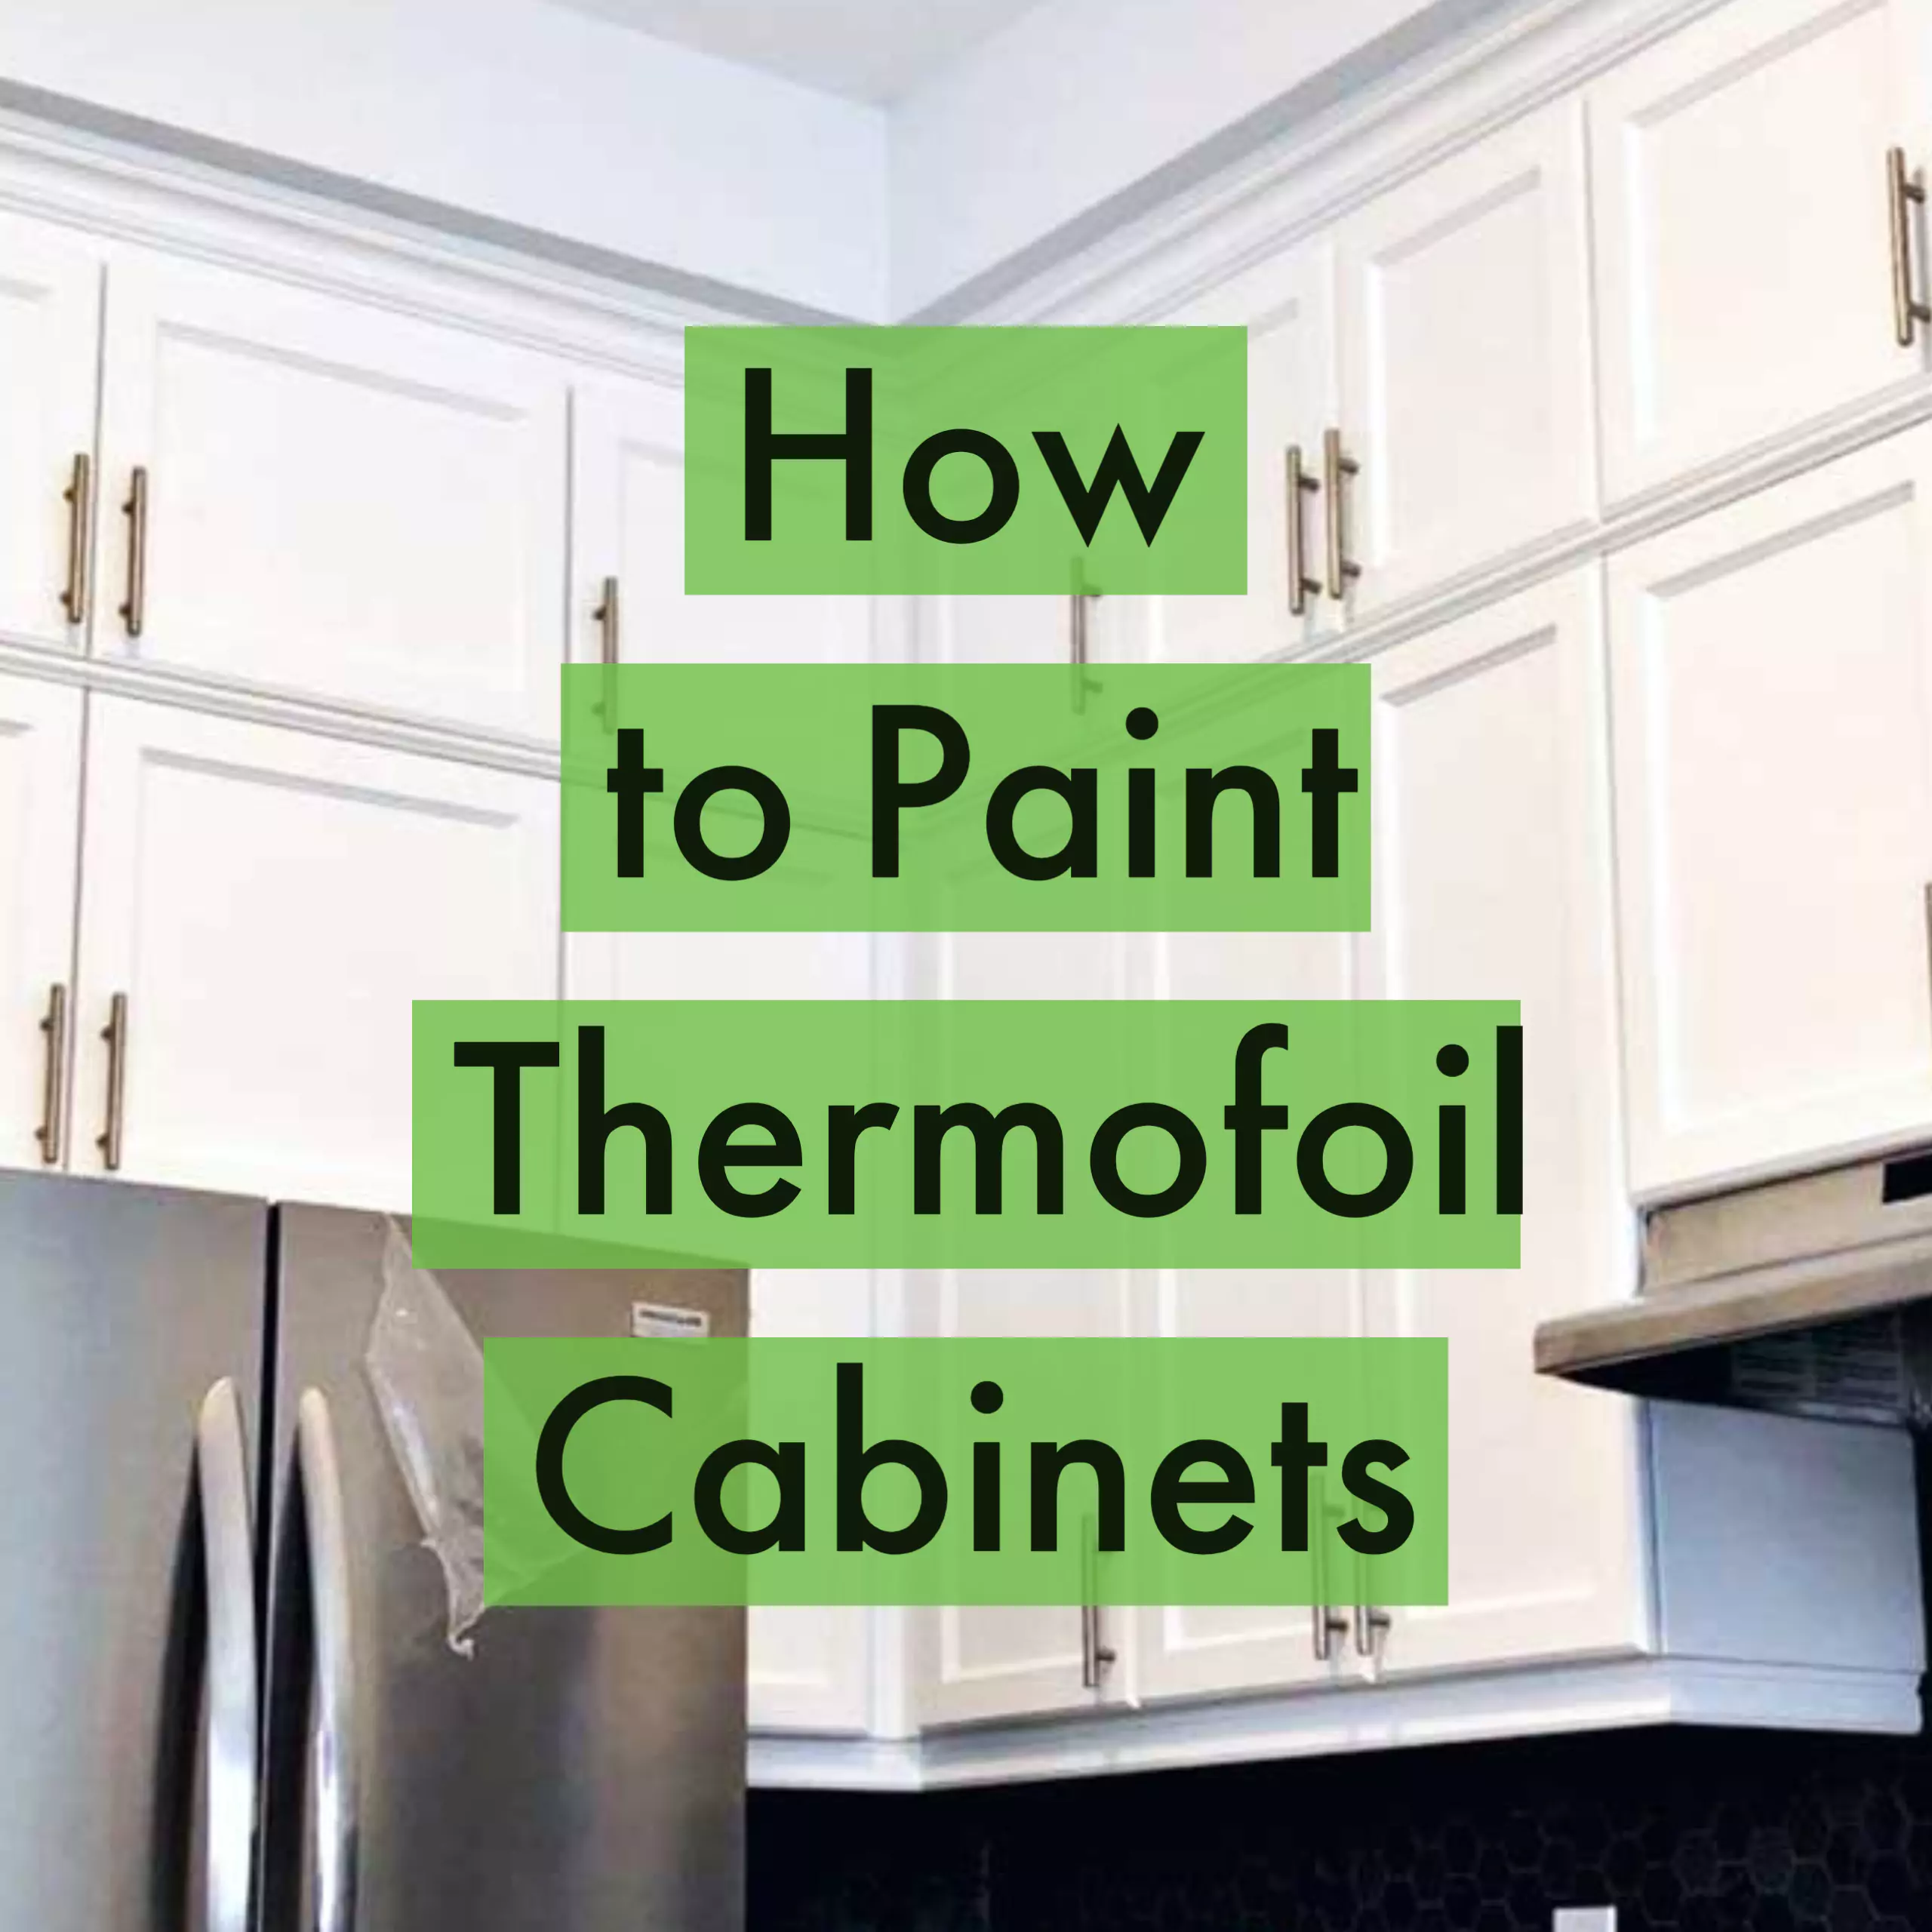 Painting Thermofoil Cabinets